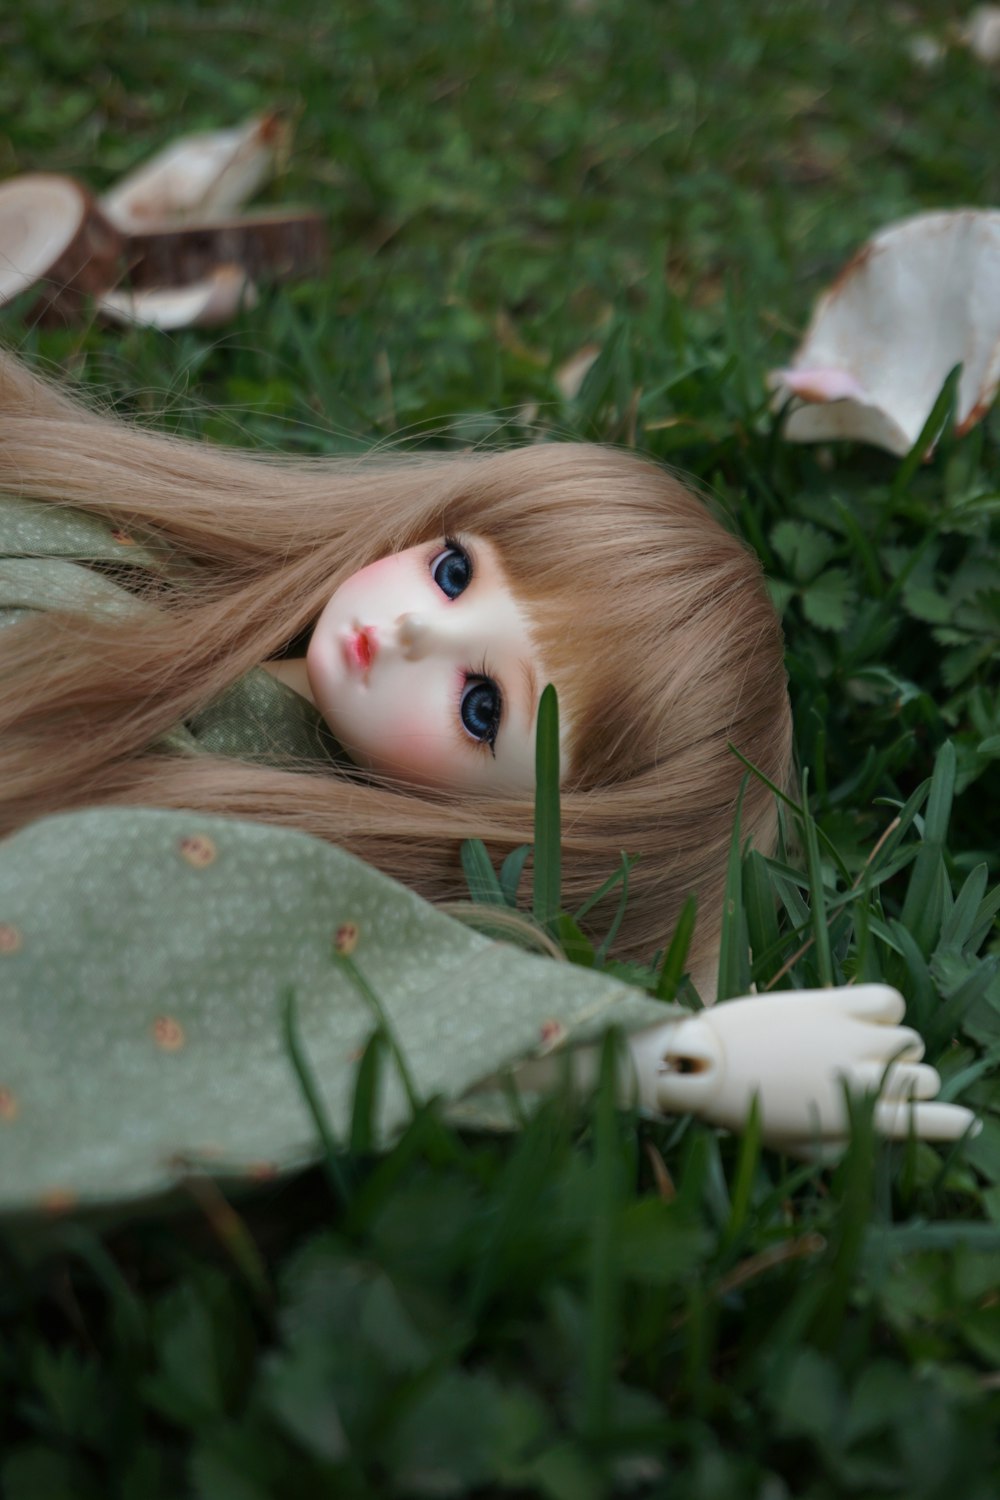 Amazing Collection of 999+ Cute Doll Images in Full 4K